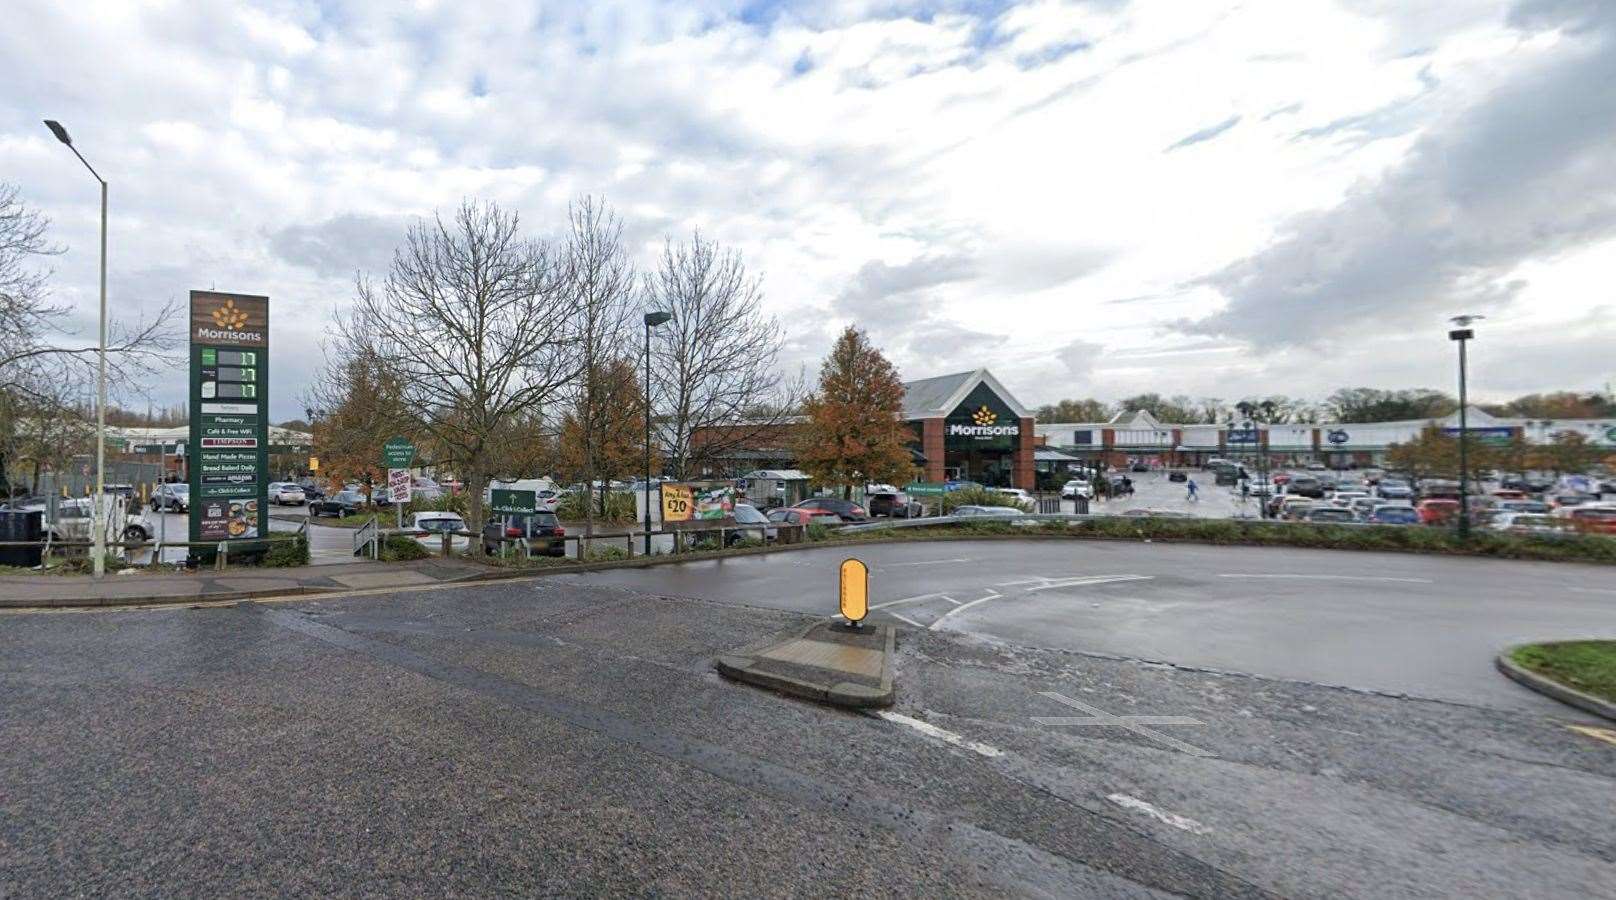 Hobbycraft will open a new store at the Riverside Retail Park in Wincheap, Canterbury. Picture: Google